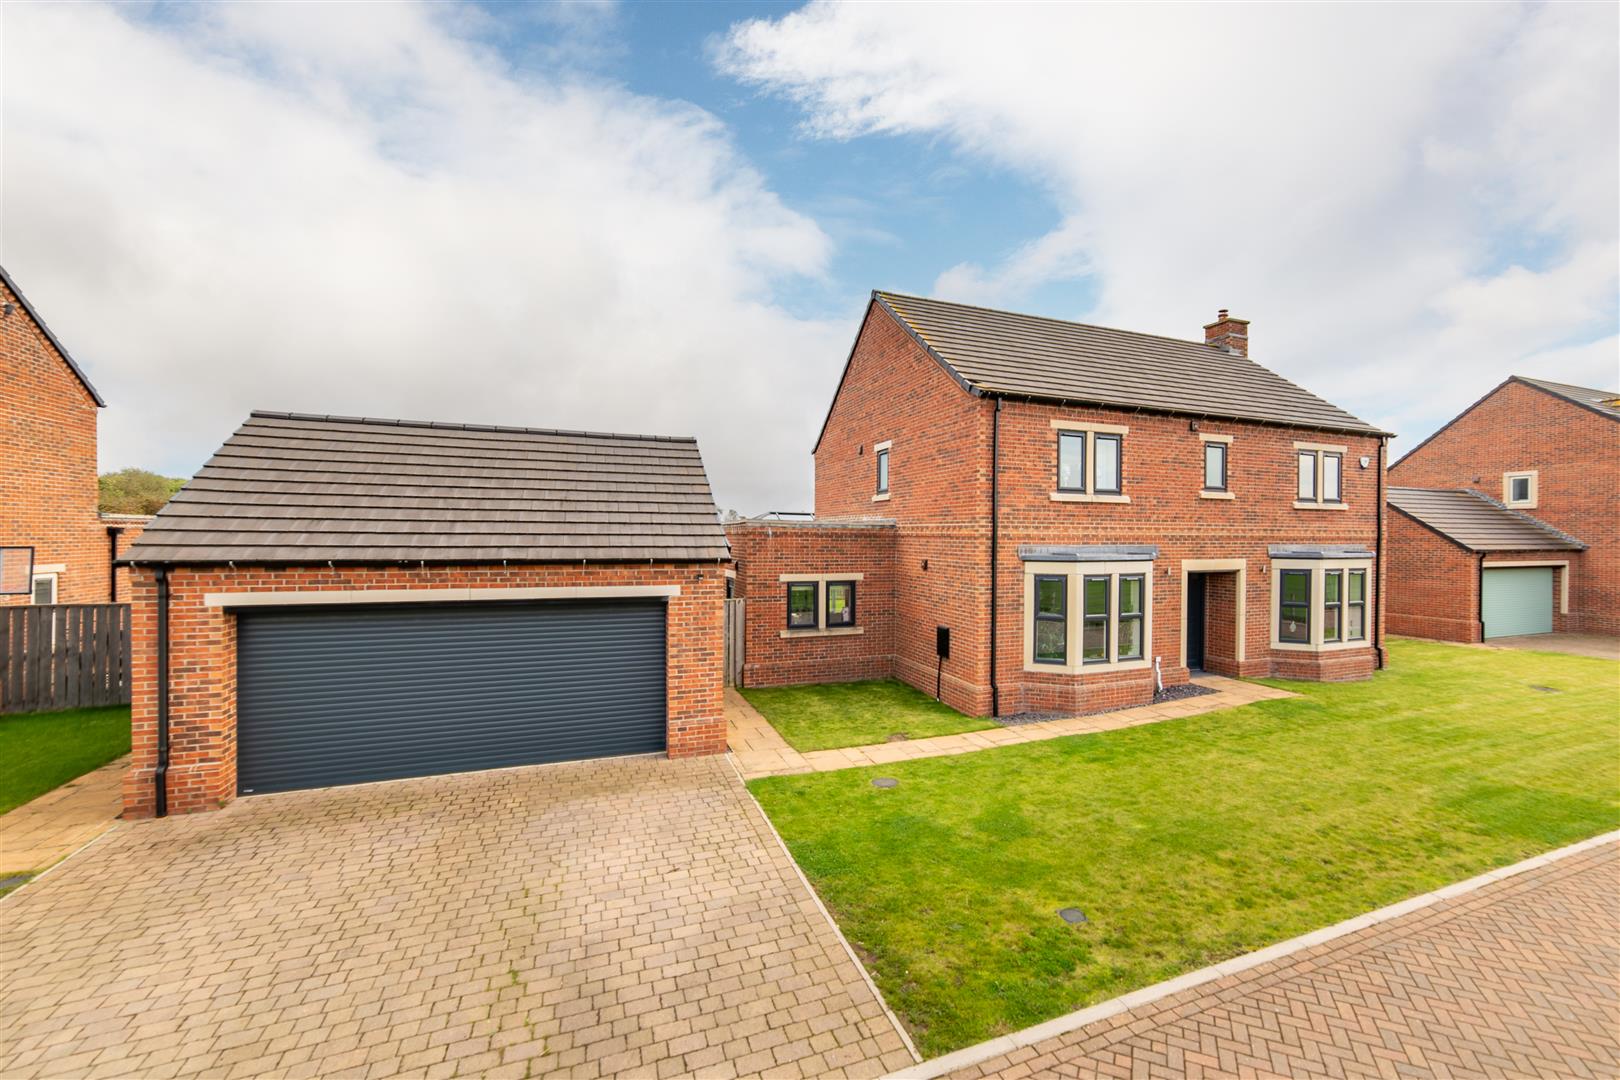 4 bed detached house for sale in Field View, Newcastle Upon Tyne, NE20